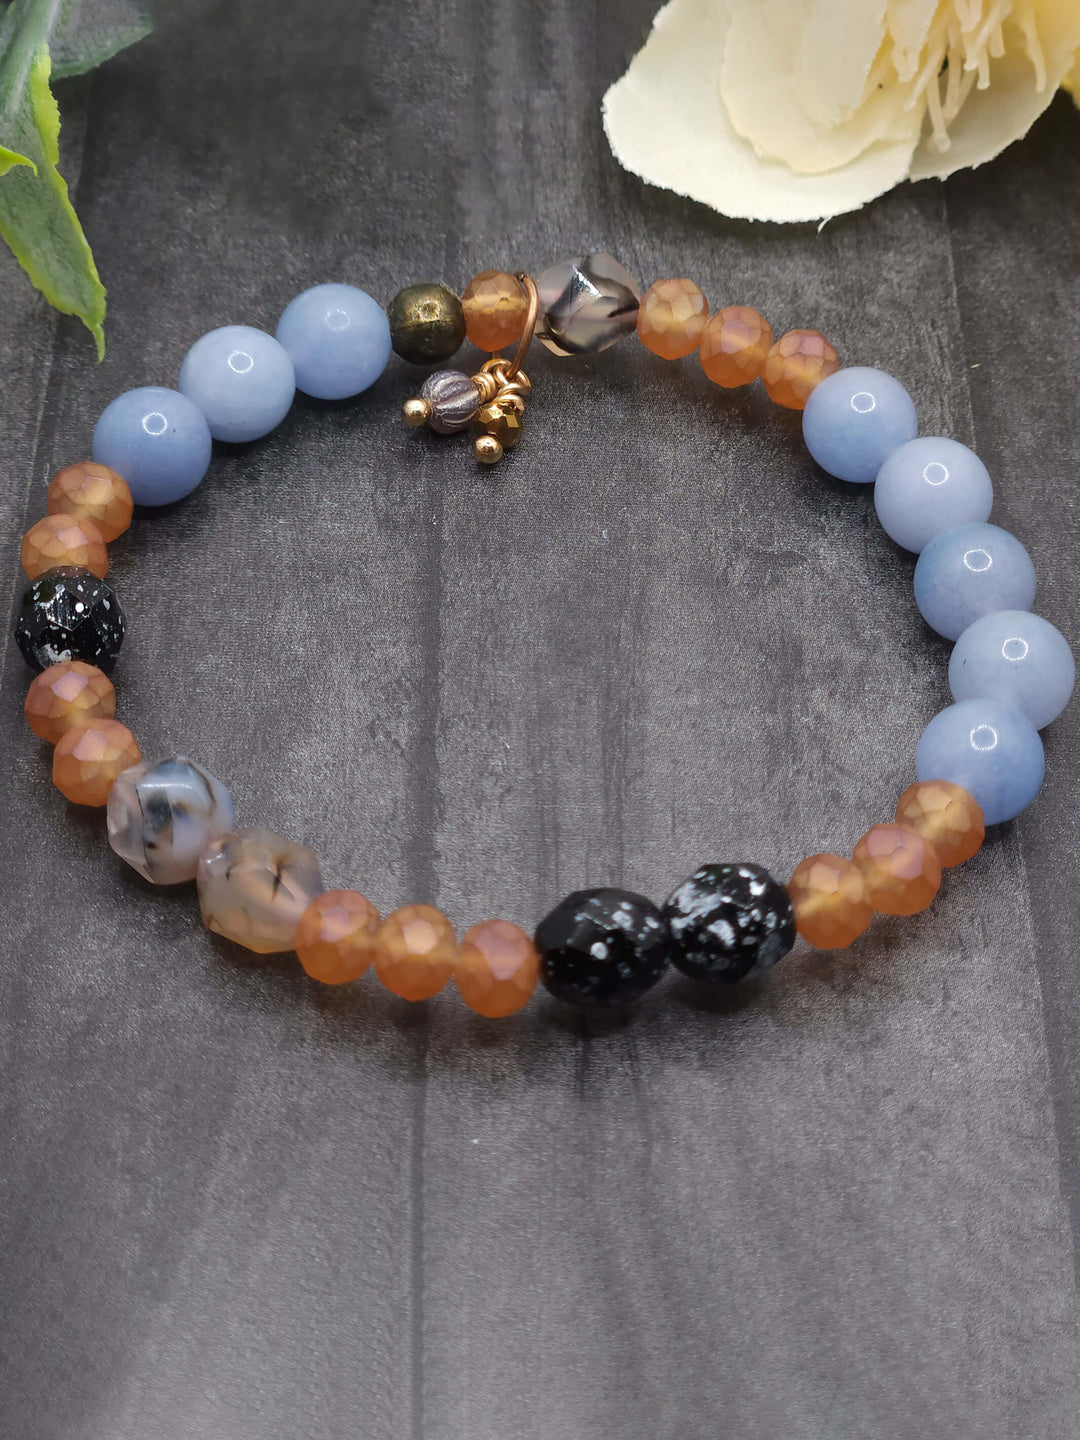 This is a photo of the American Kestral Strech Bracelet with colors of pale blue, soft orange, beige, and small touches of black. A gray Czech Glass melon bead and a small gold colored crystal are hand wire wrapped as charms.